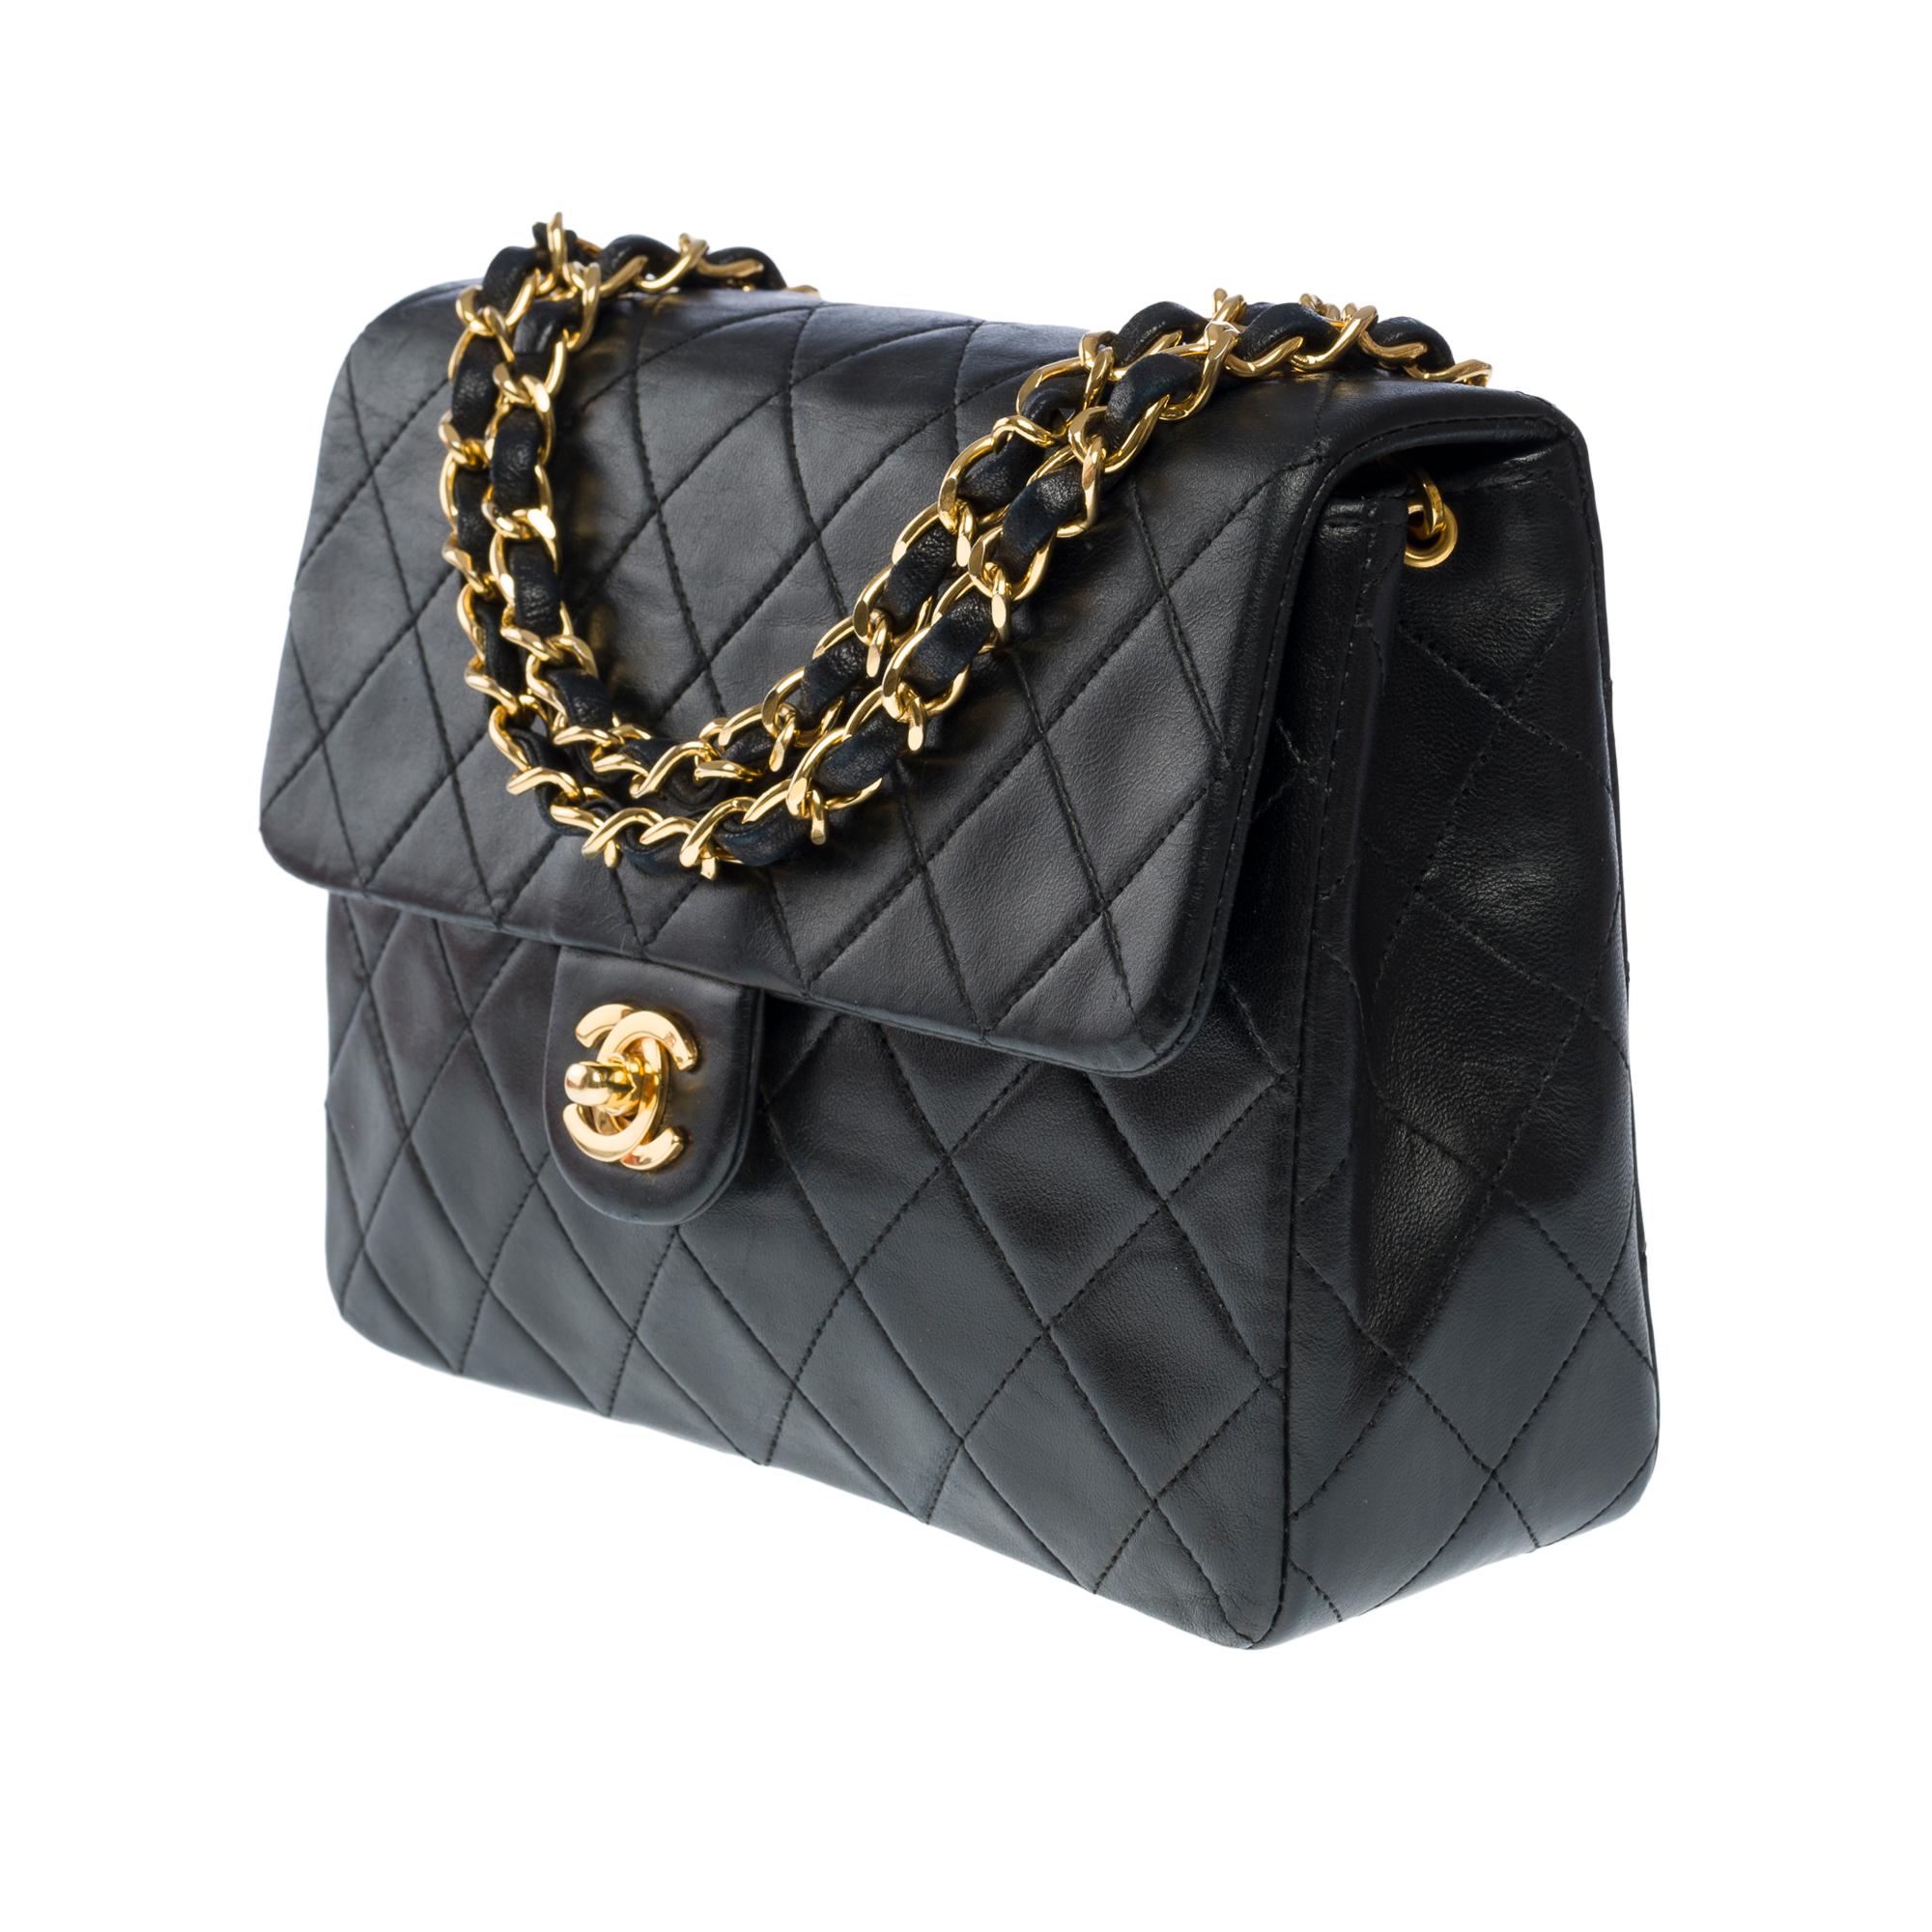 Gorgeous Chanel Timeless Mini shoulder flap bag in black quilted lambskin, GHW 1